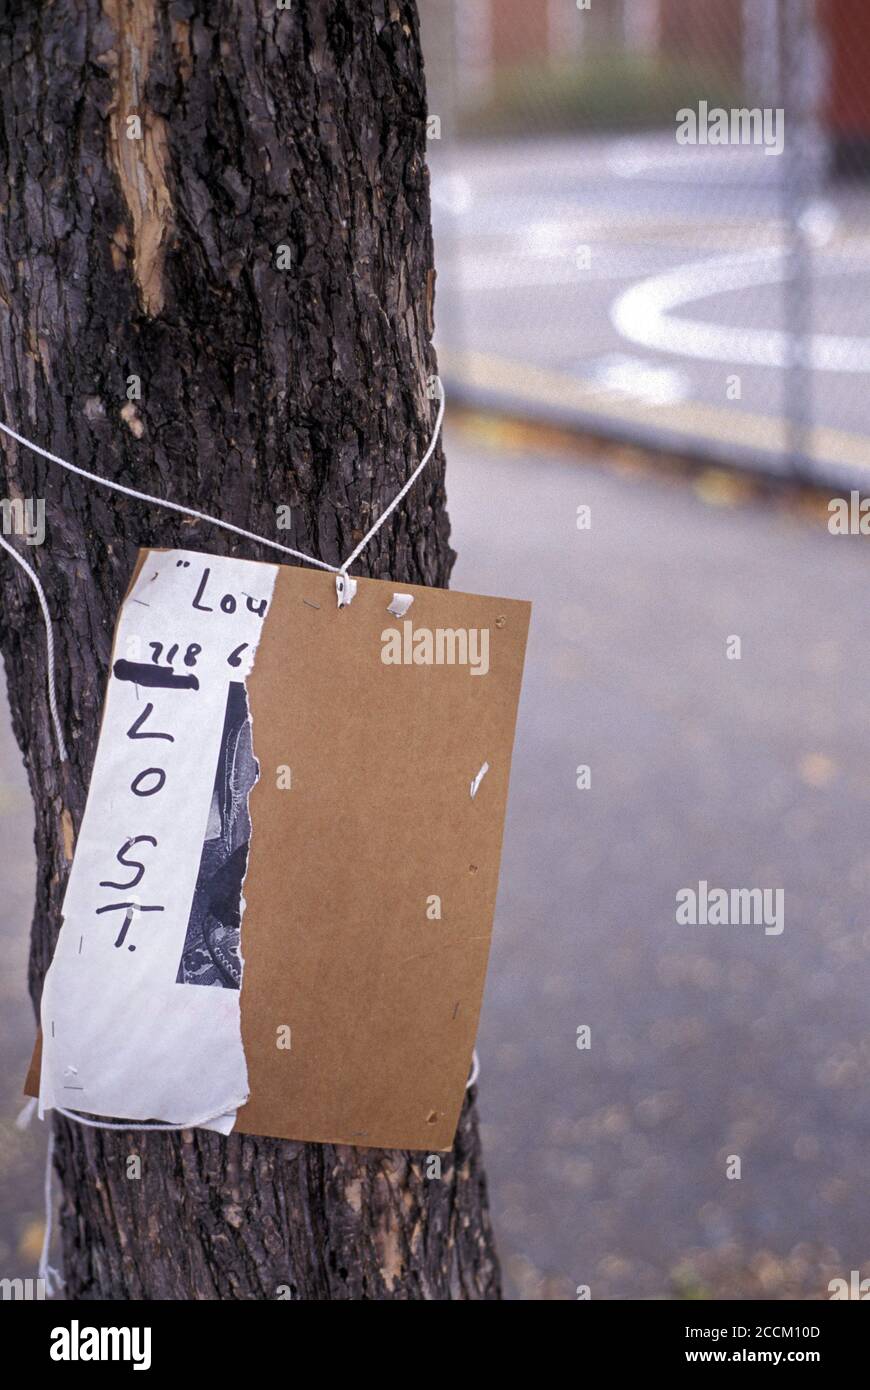 'Lost' sign posted on tree. Stock Photo